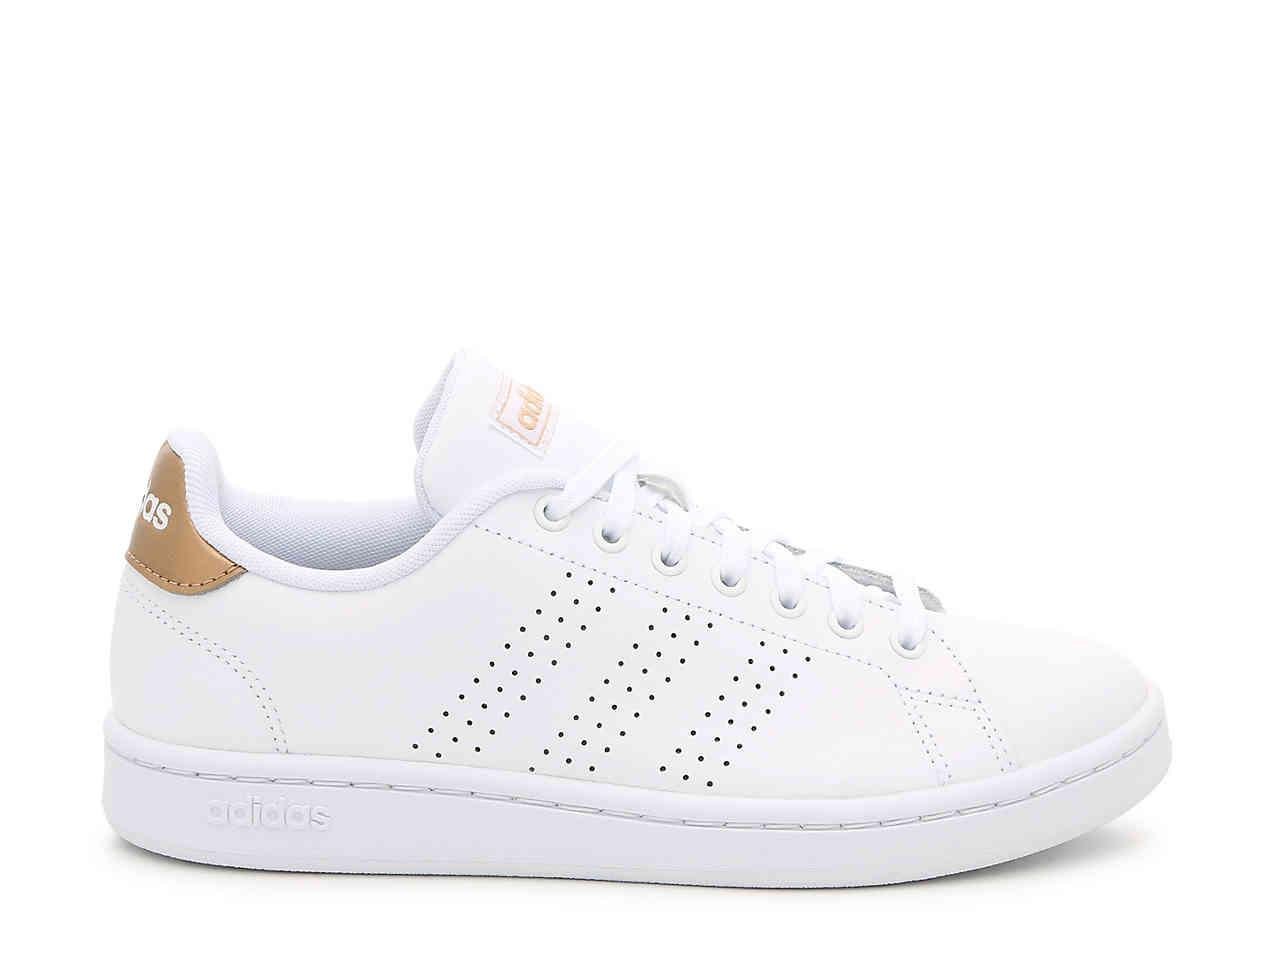 adidas Leather Advantage Sneaker in 